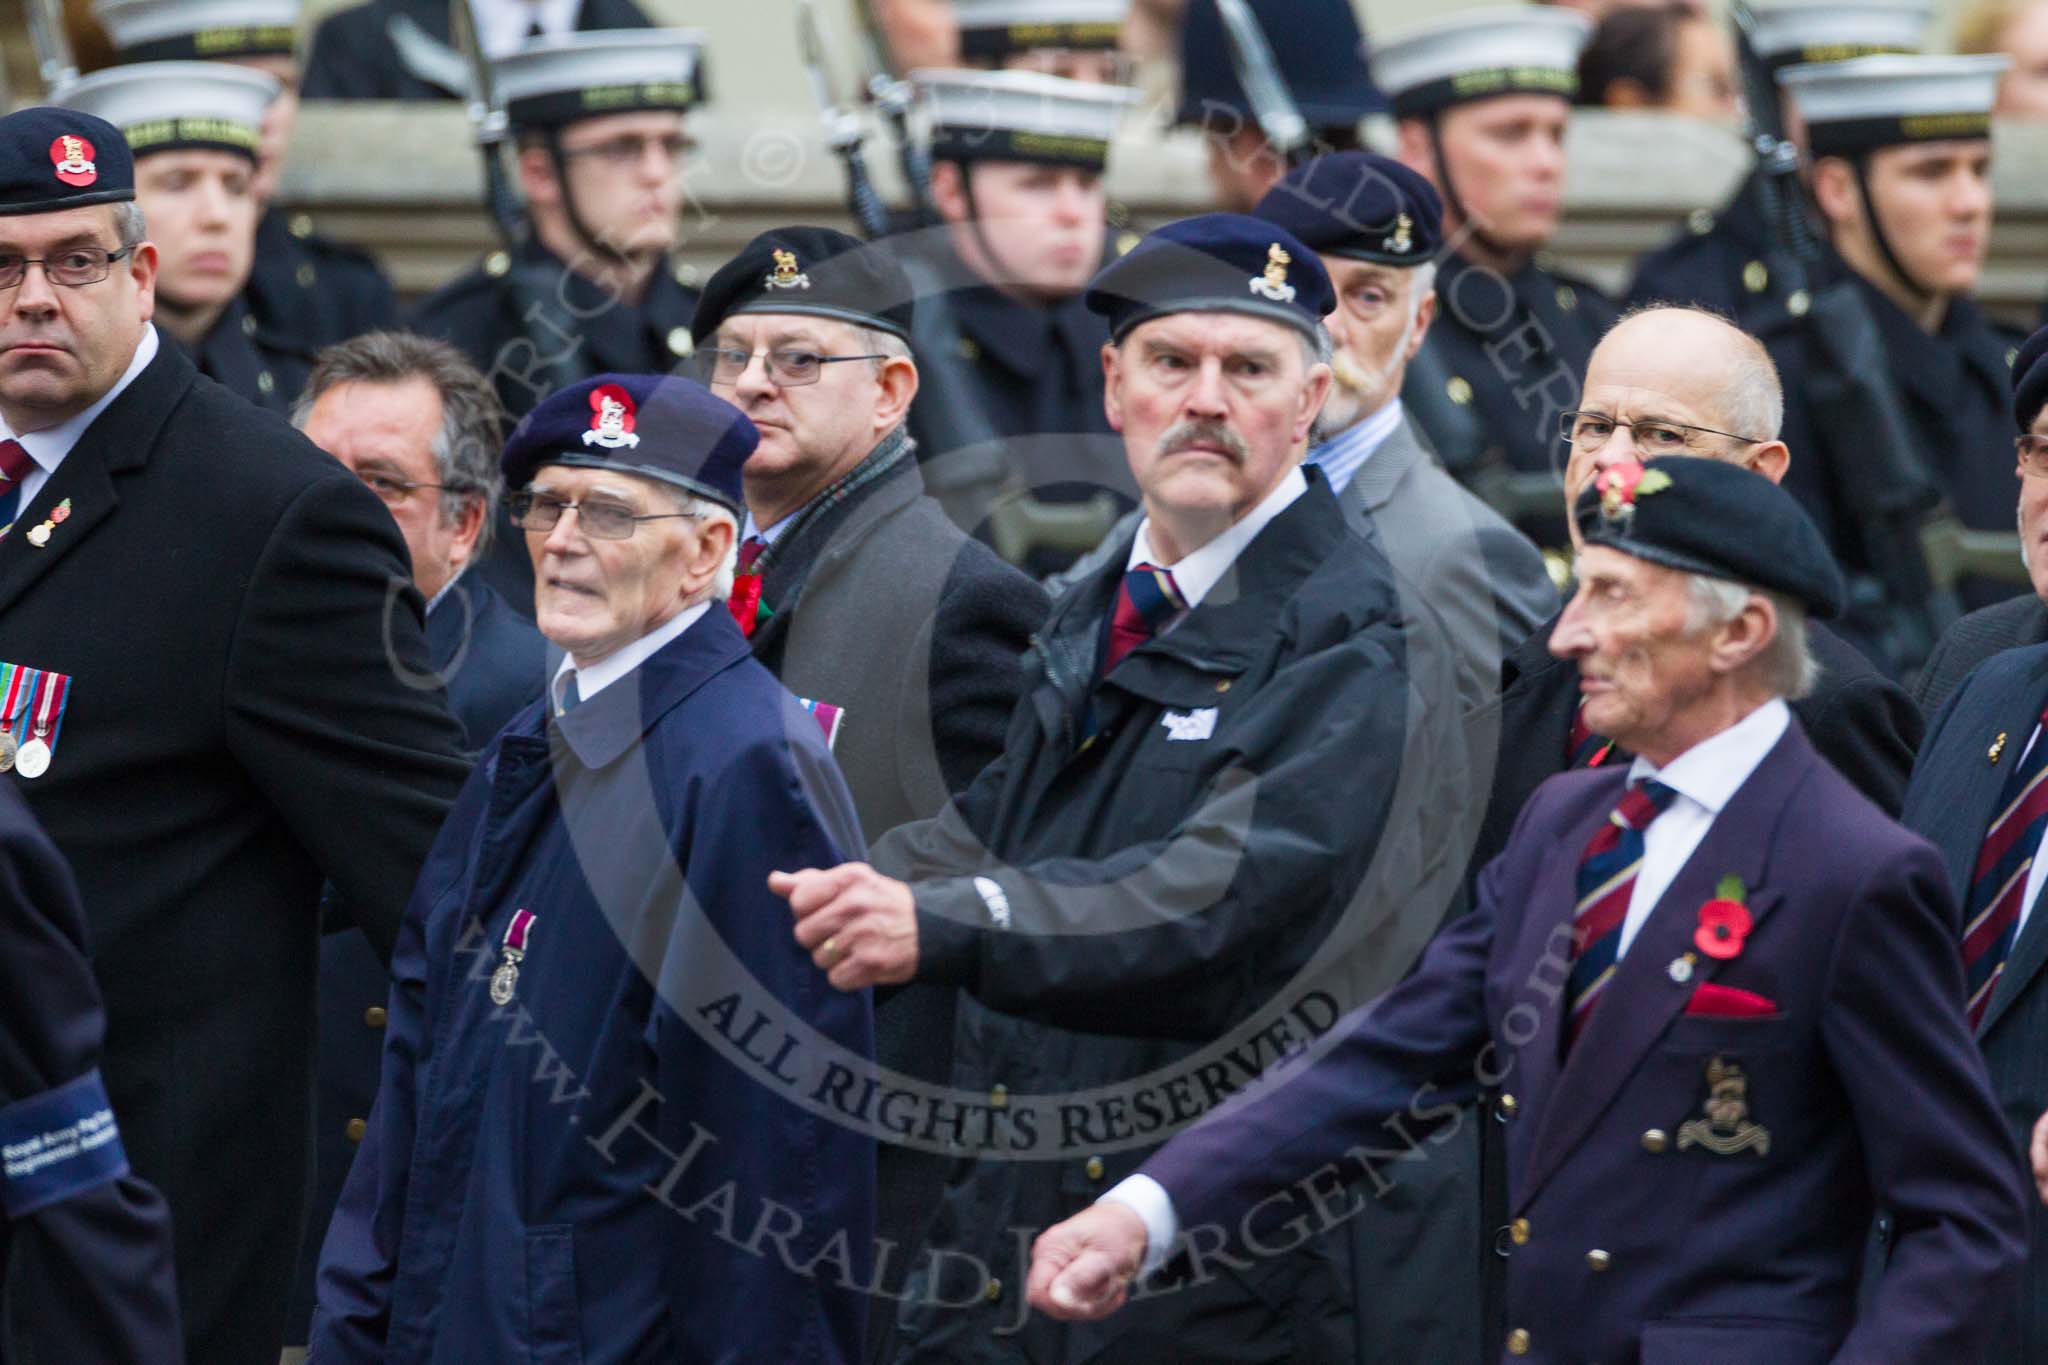 Remembrance Sunday at the Cenotaph 2015: Group B18, Royal Army Pay Corps Regimental Association.
Cenotaph, Whitehall, London SW1,
London,
Greater London,
United Kingdom,
on 08 November 2015 at 11:40, image #145